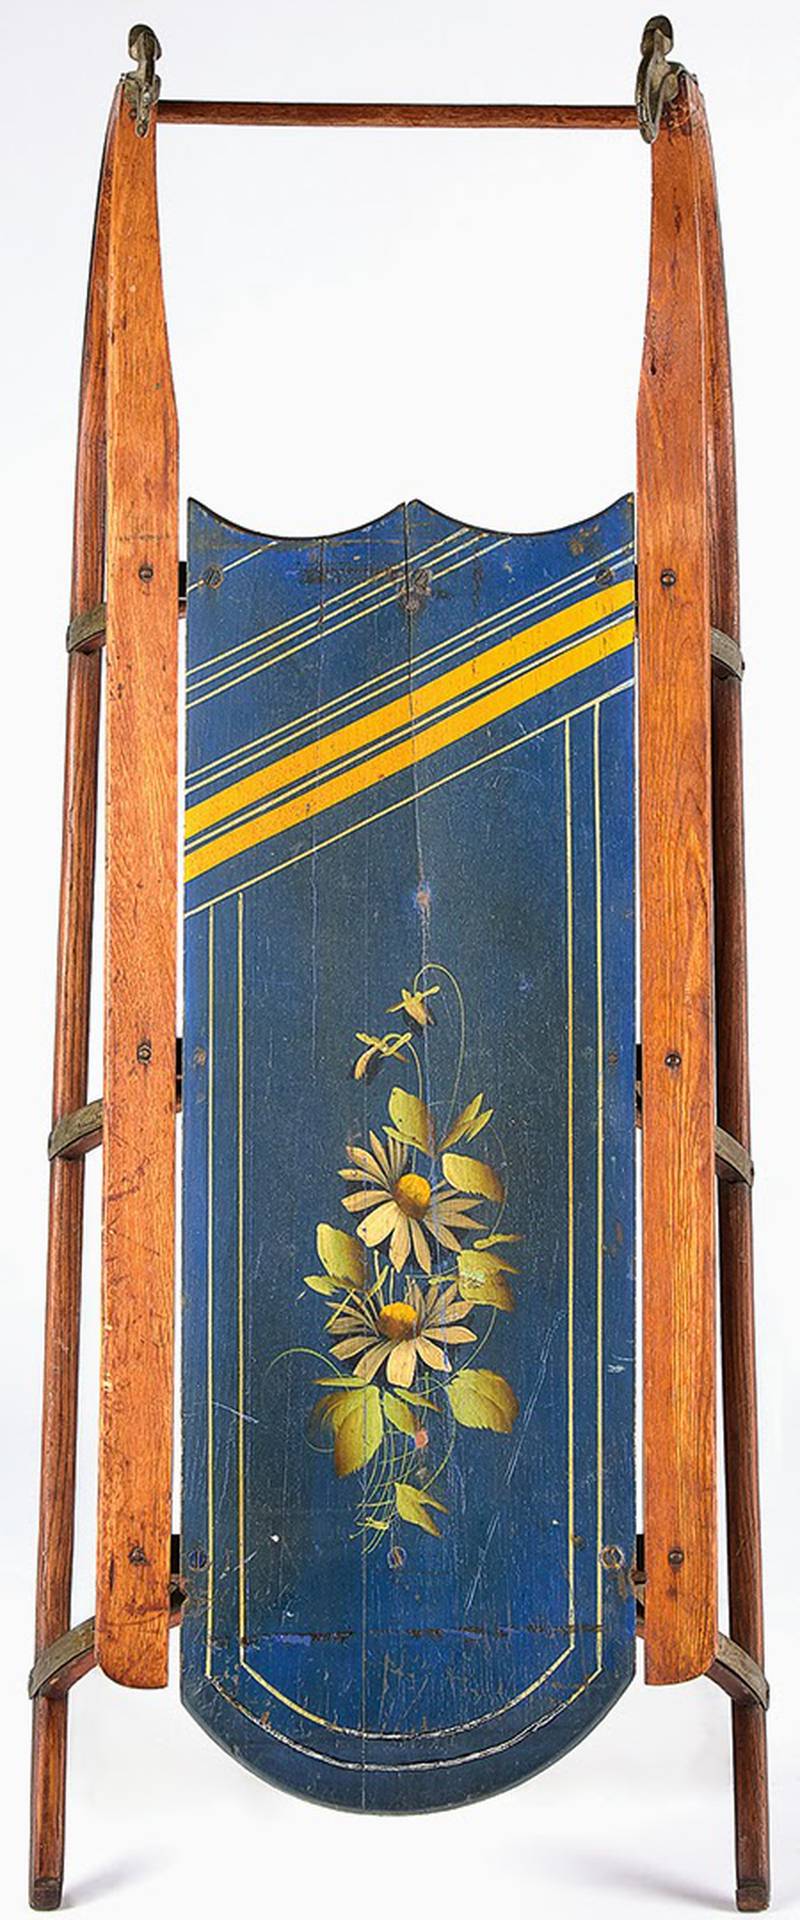 A painted sled makes a snowy day even more festive. Like many homemade toys, this one doubles as a piece of folk art. It sold for $380 including the buyers’ premium.